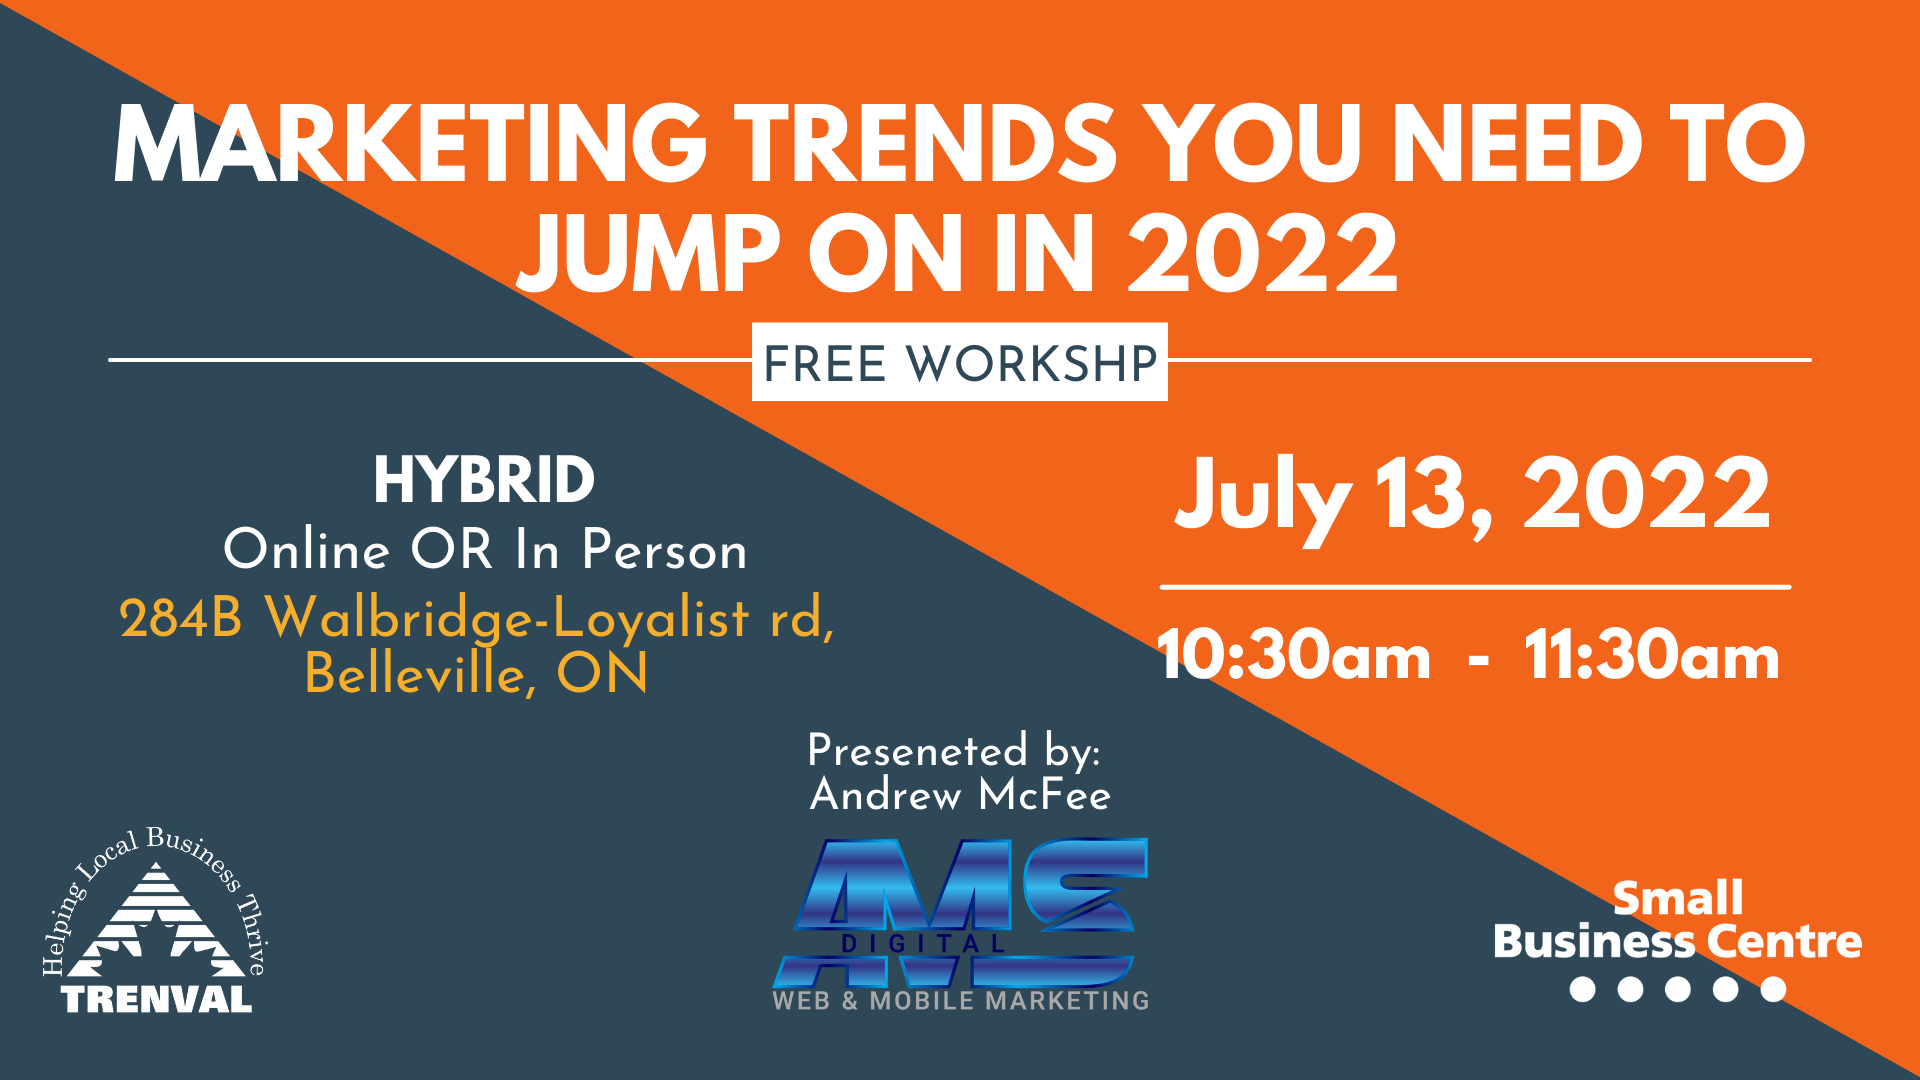 July 13 Marketing Trends You Need to Jump on in 2022